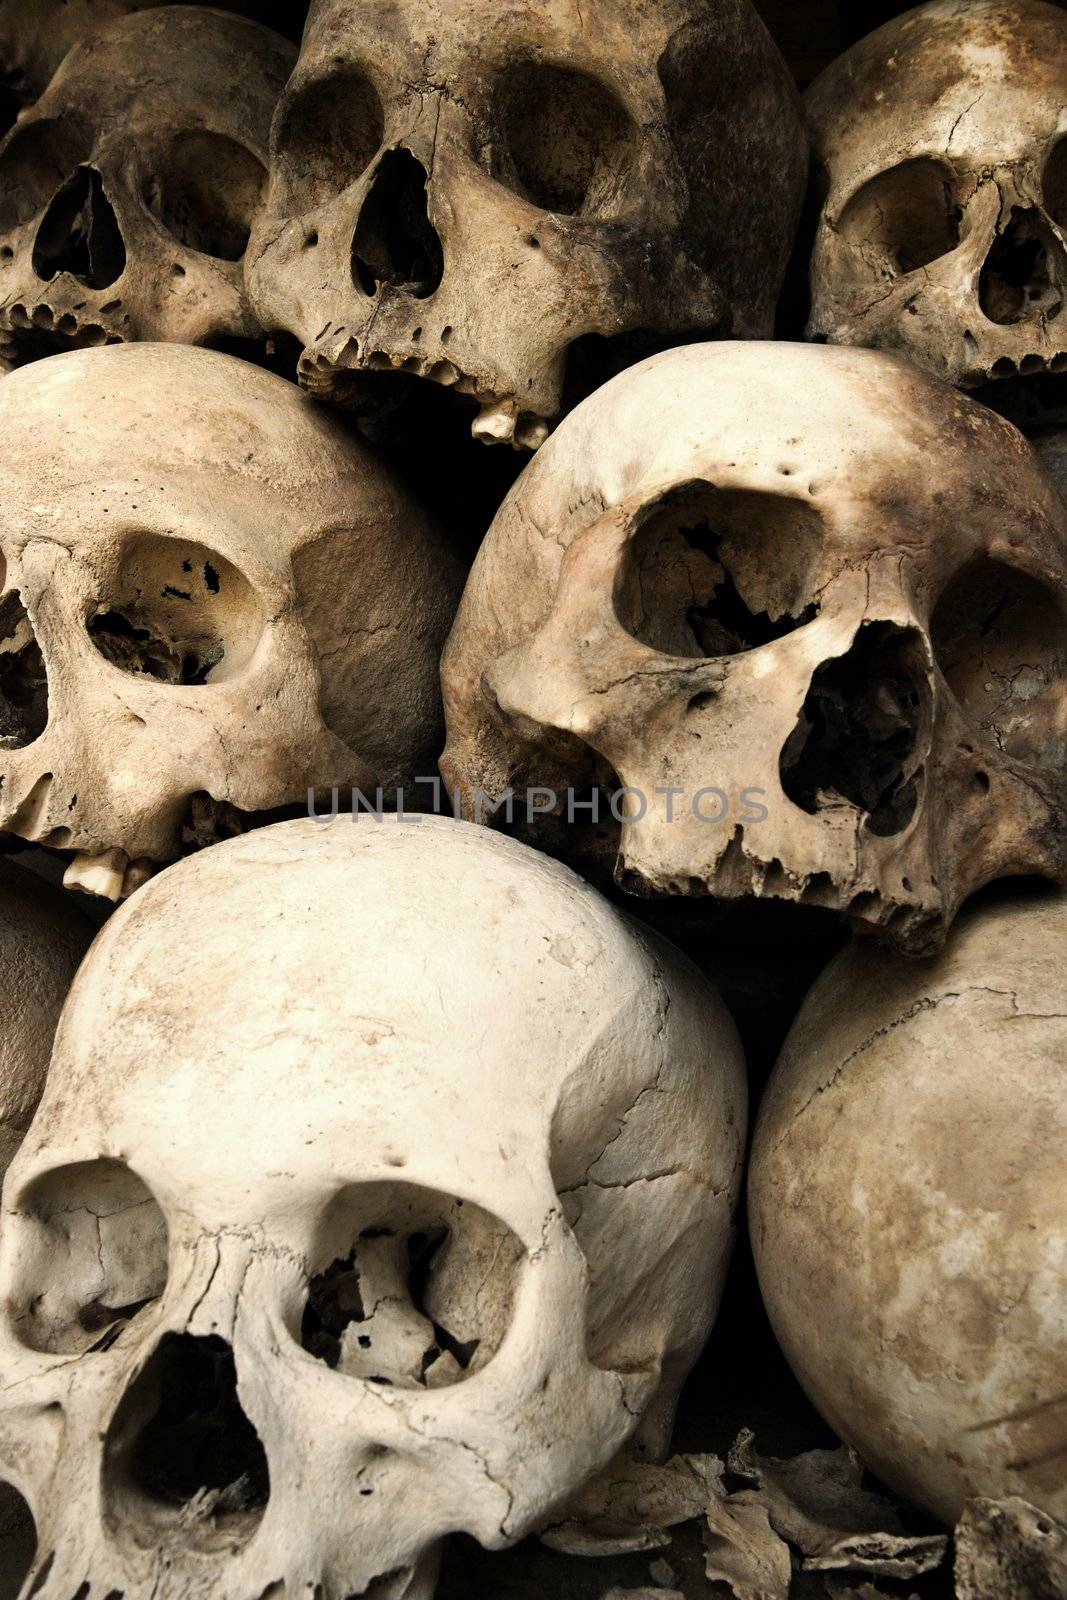 Photo of a pile of skulls from the Killing Fields in Phnom Penh, Cambodia.